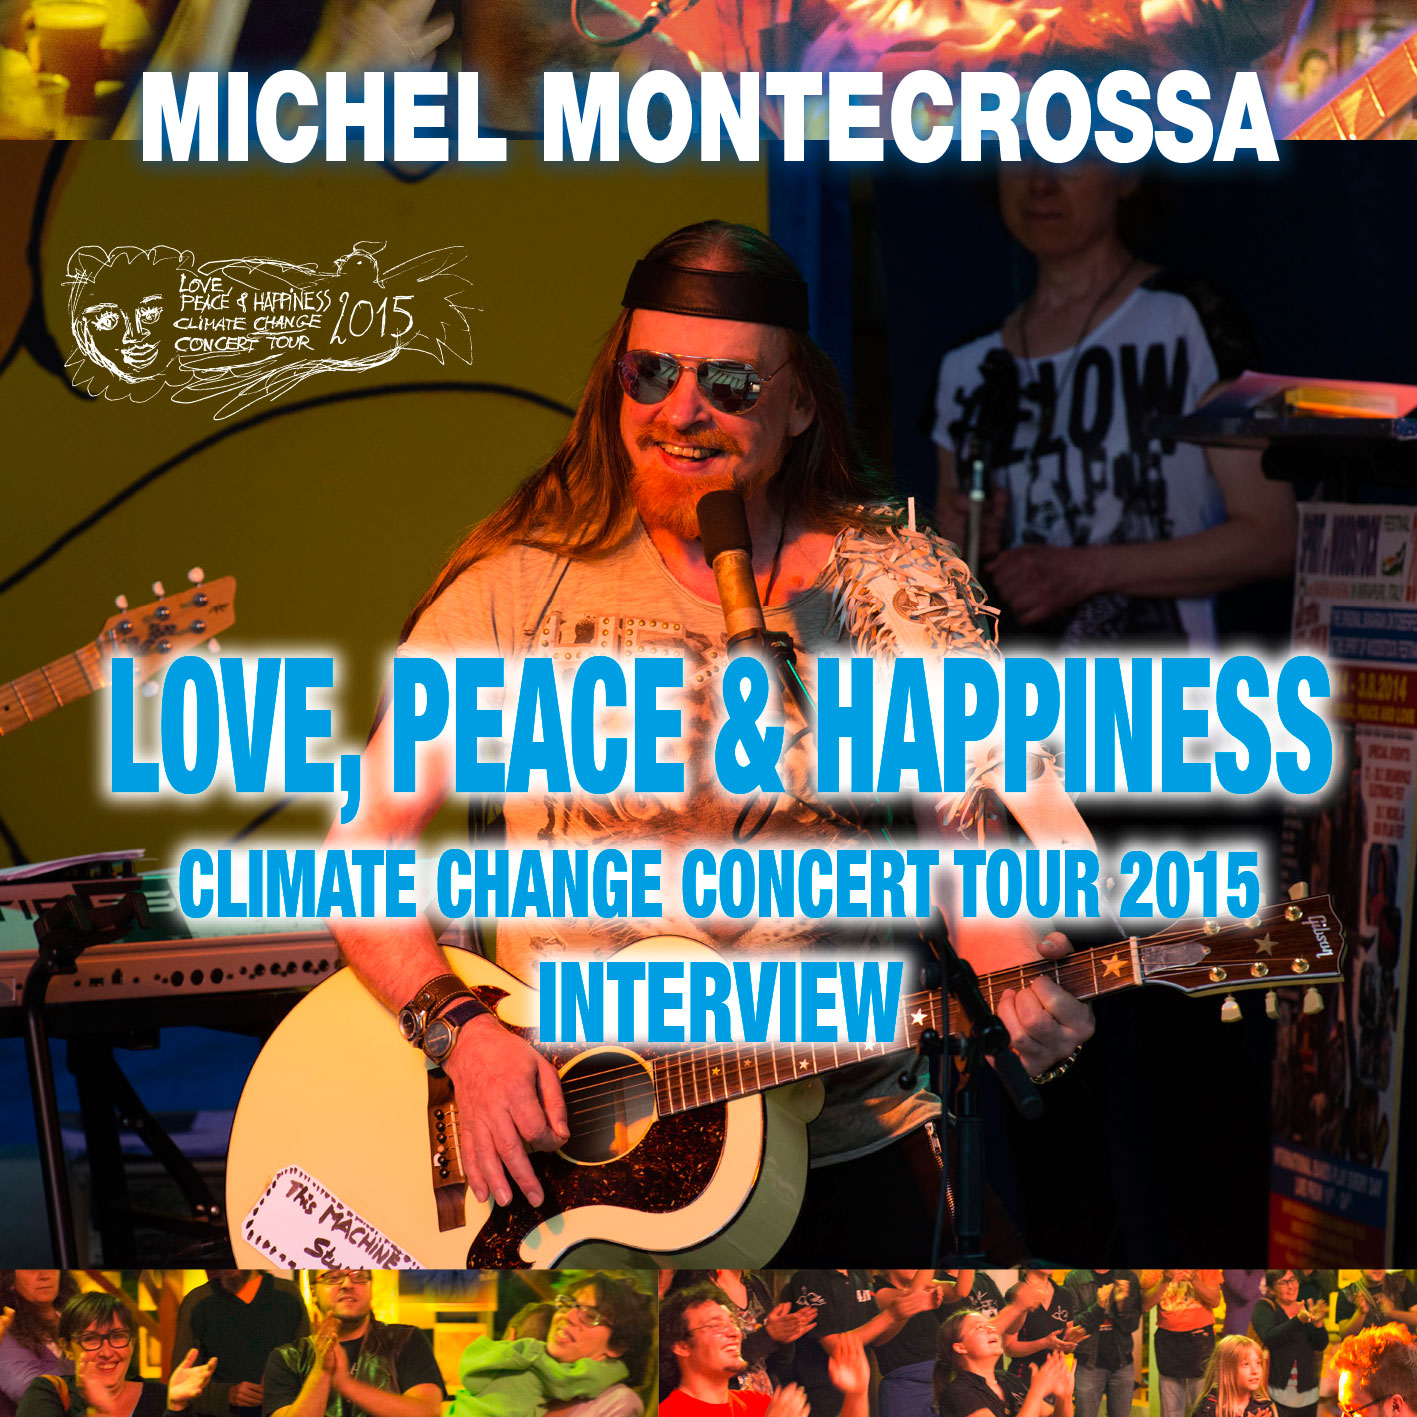 Love, Peace & Happiness Climate Change Concert Tour 2015 Interview